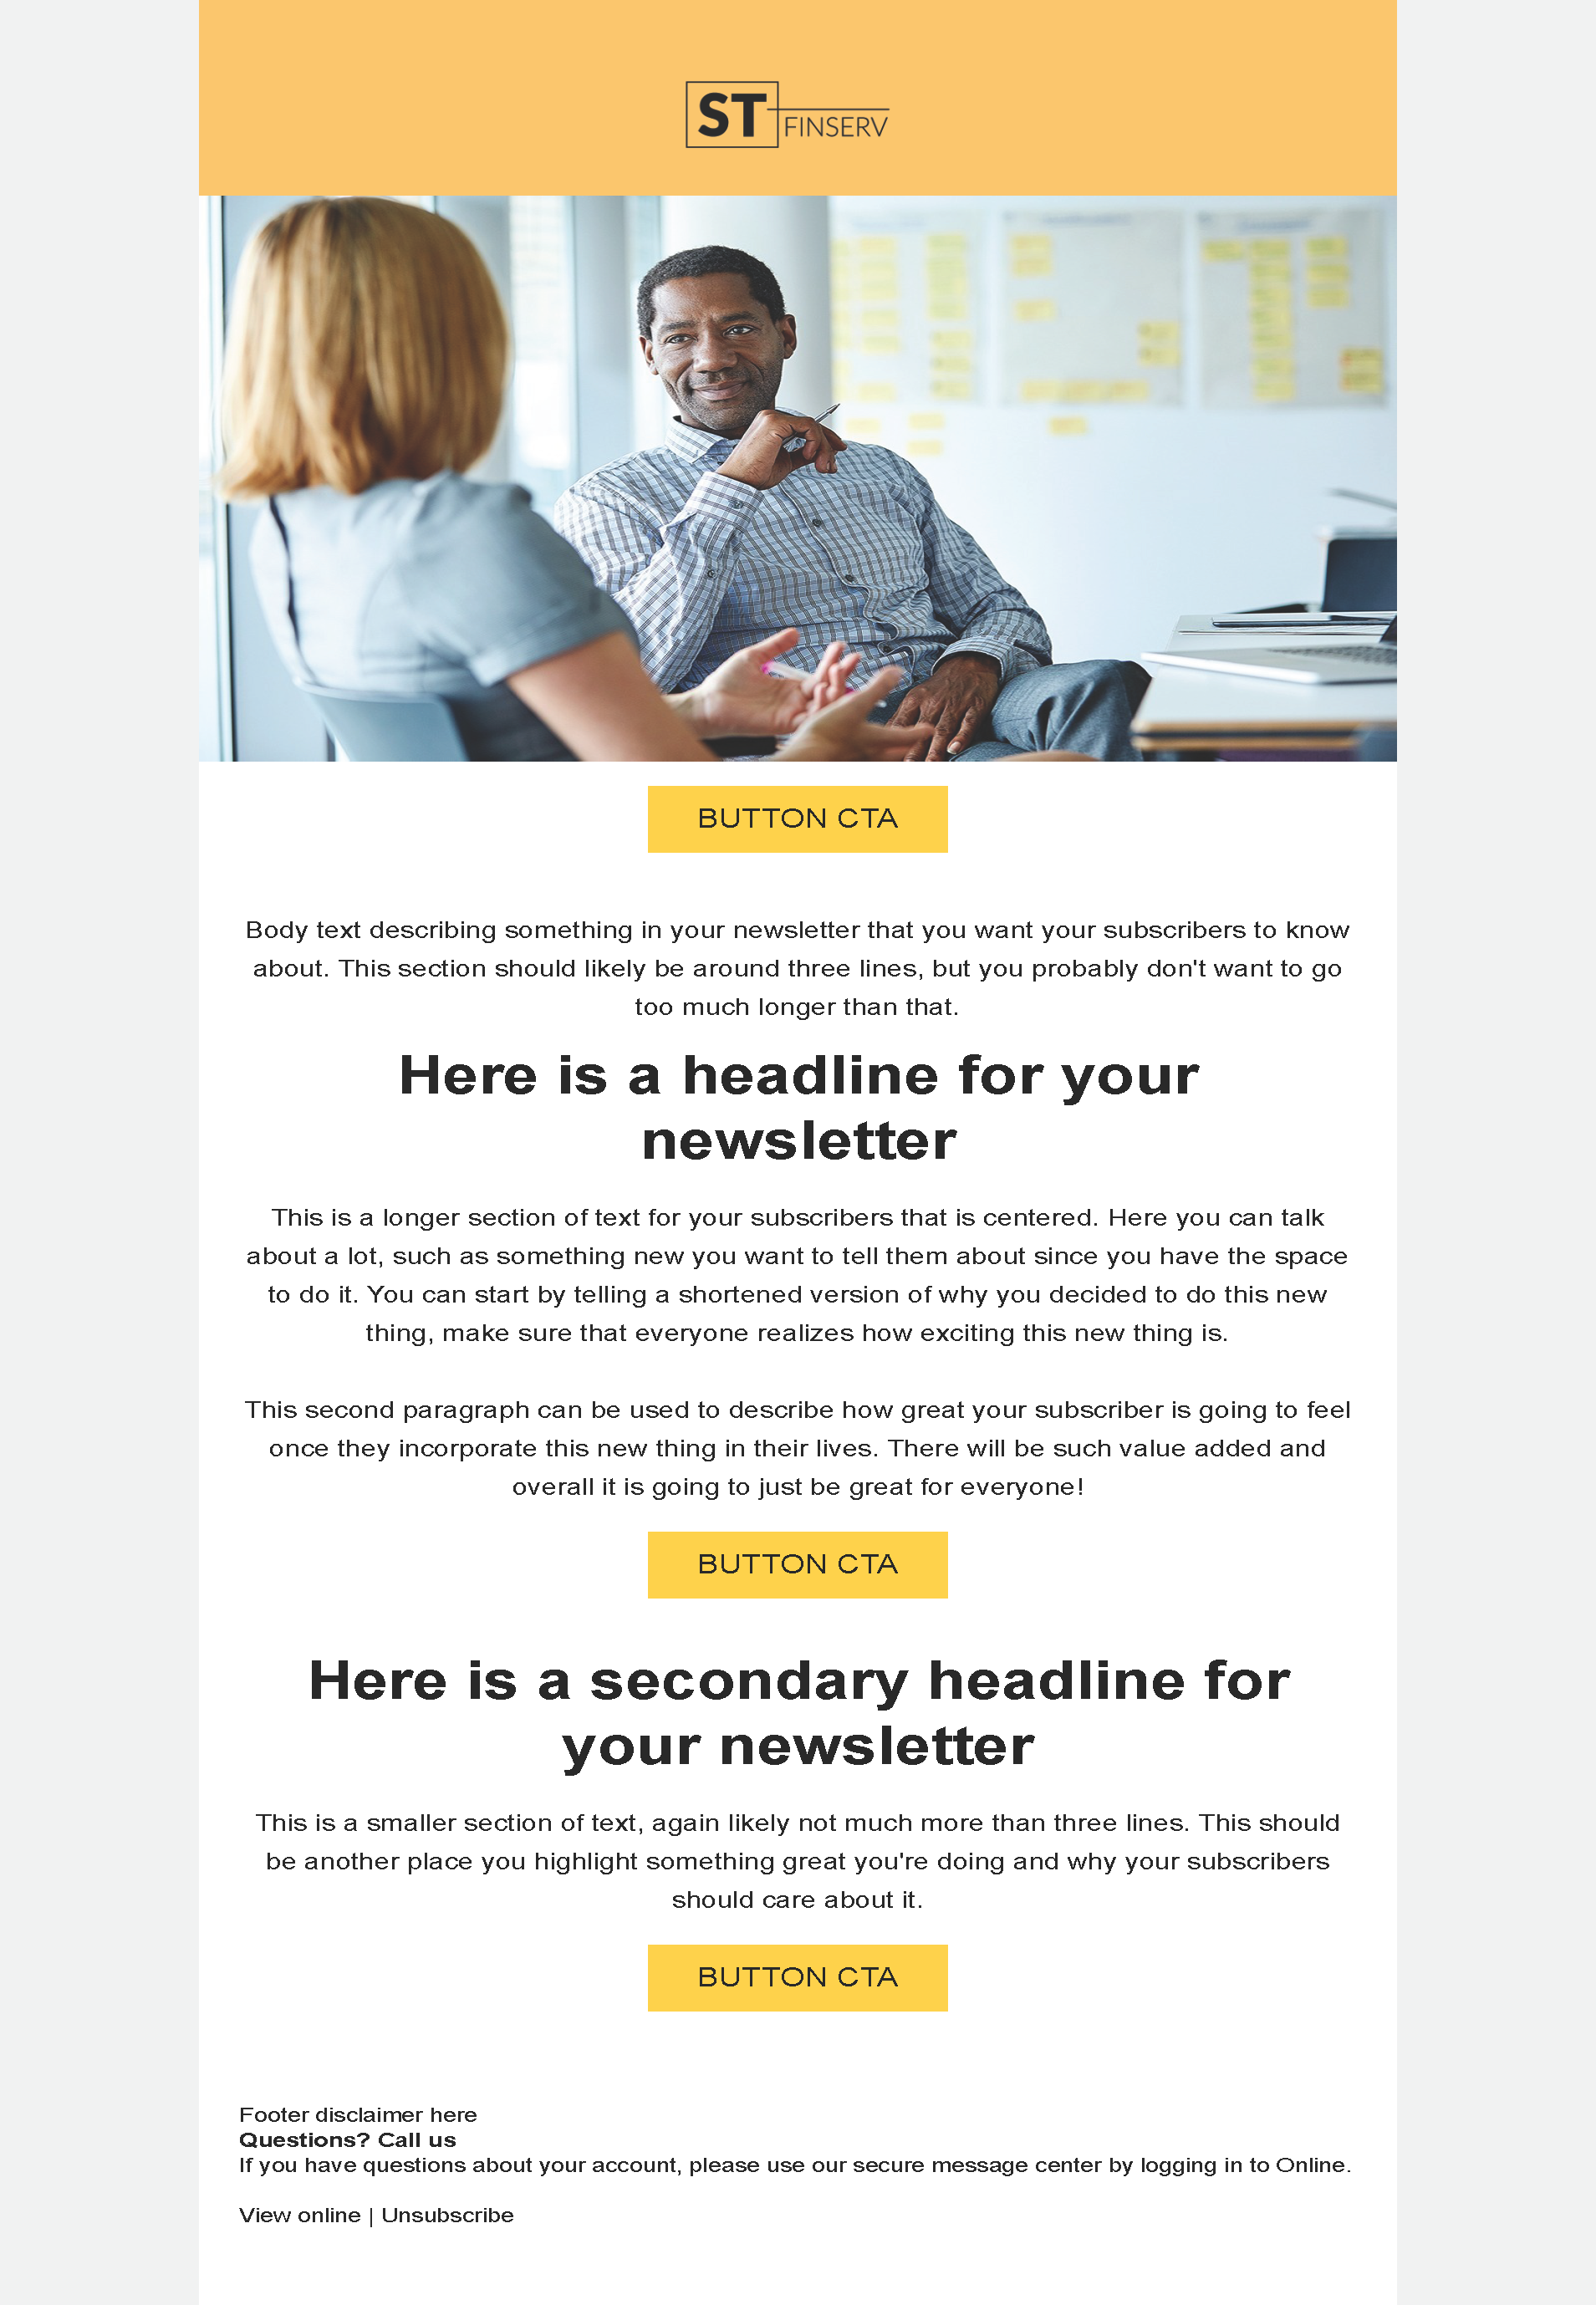 Newsletter email template 2 for highly regulated companies